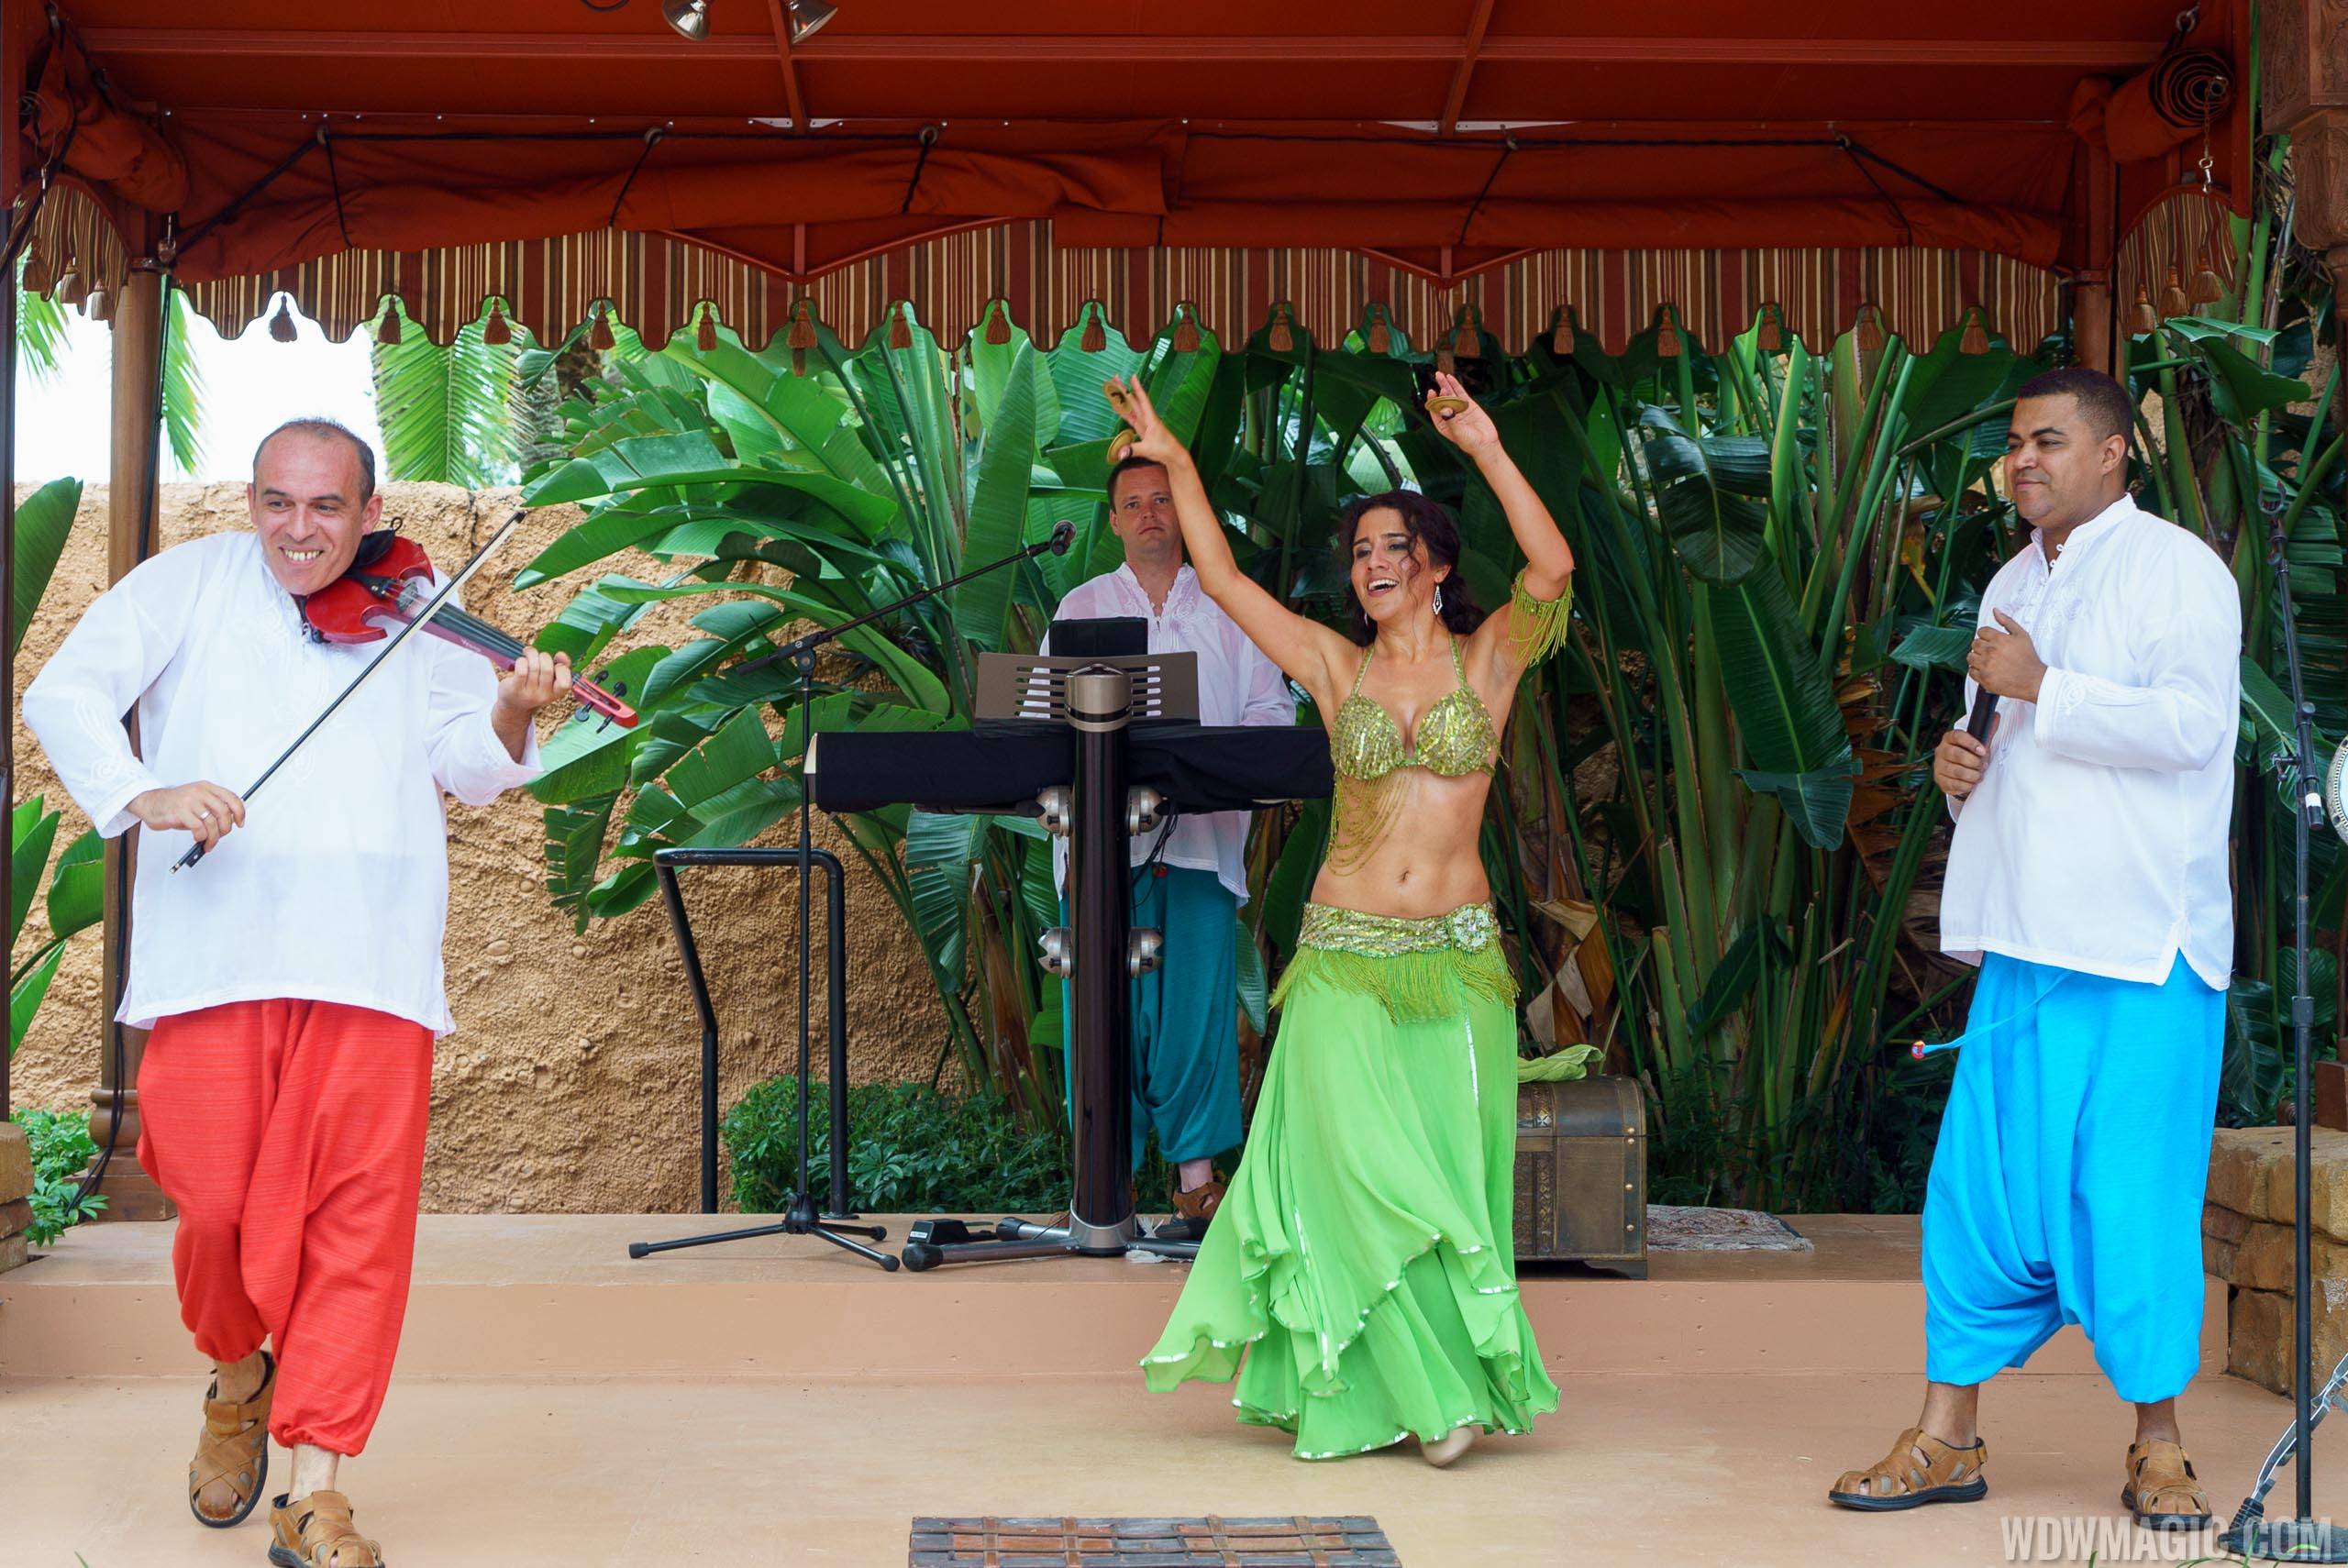 VIDEO - Belly Dancing returns to Epcot's Morocco Pavilion with Musique Aramenco